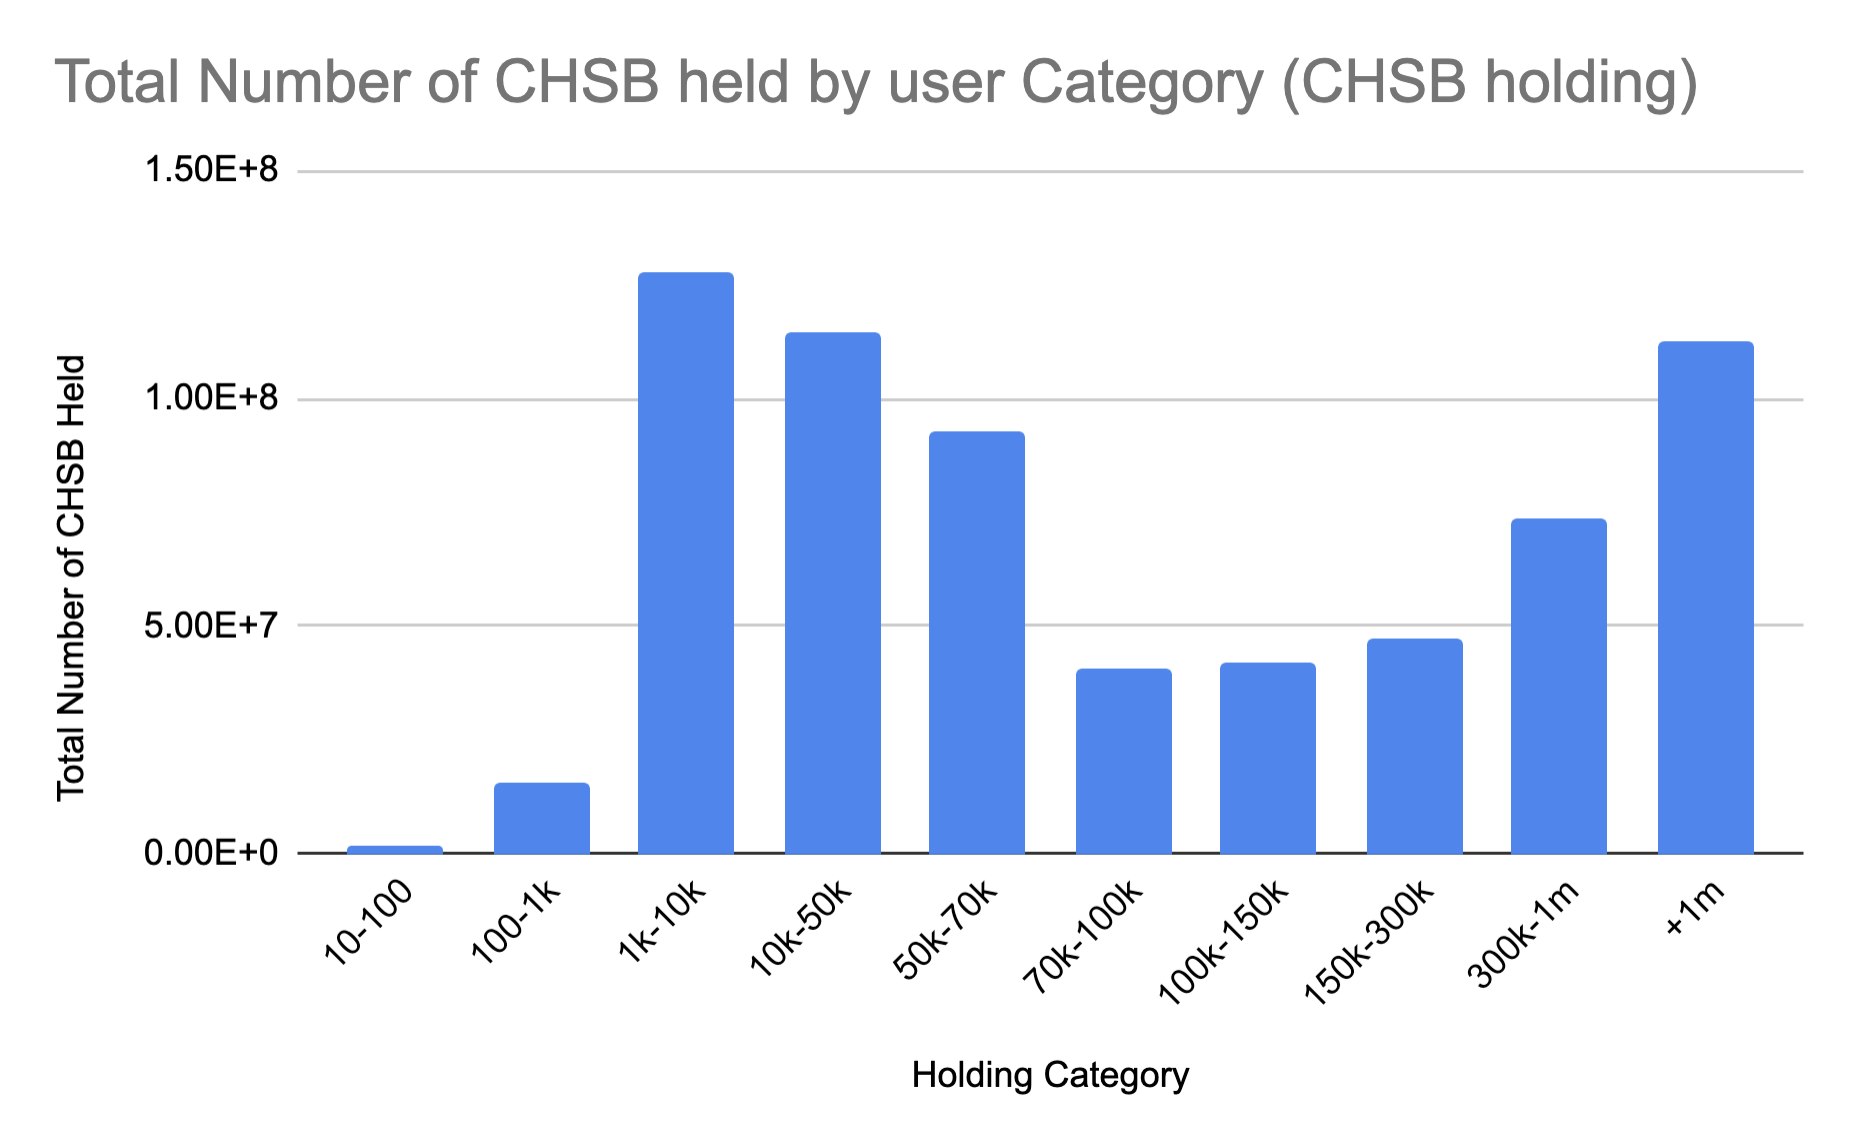 Assets concentrations for CHSB in the SwissBorg app.